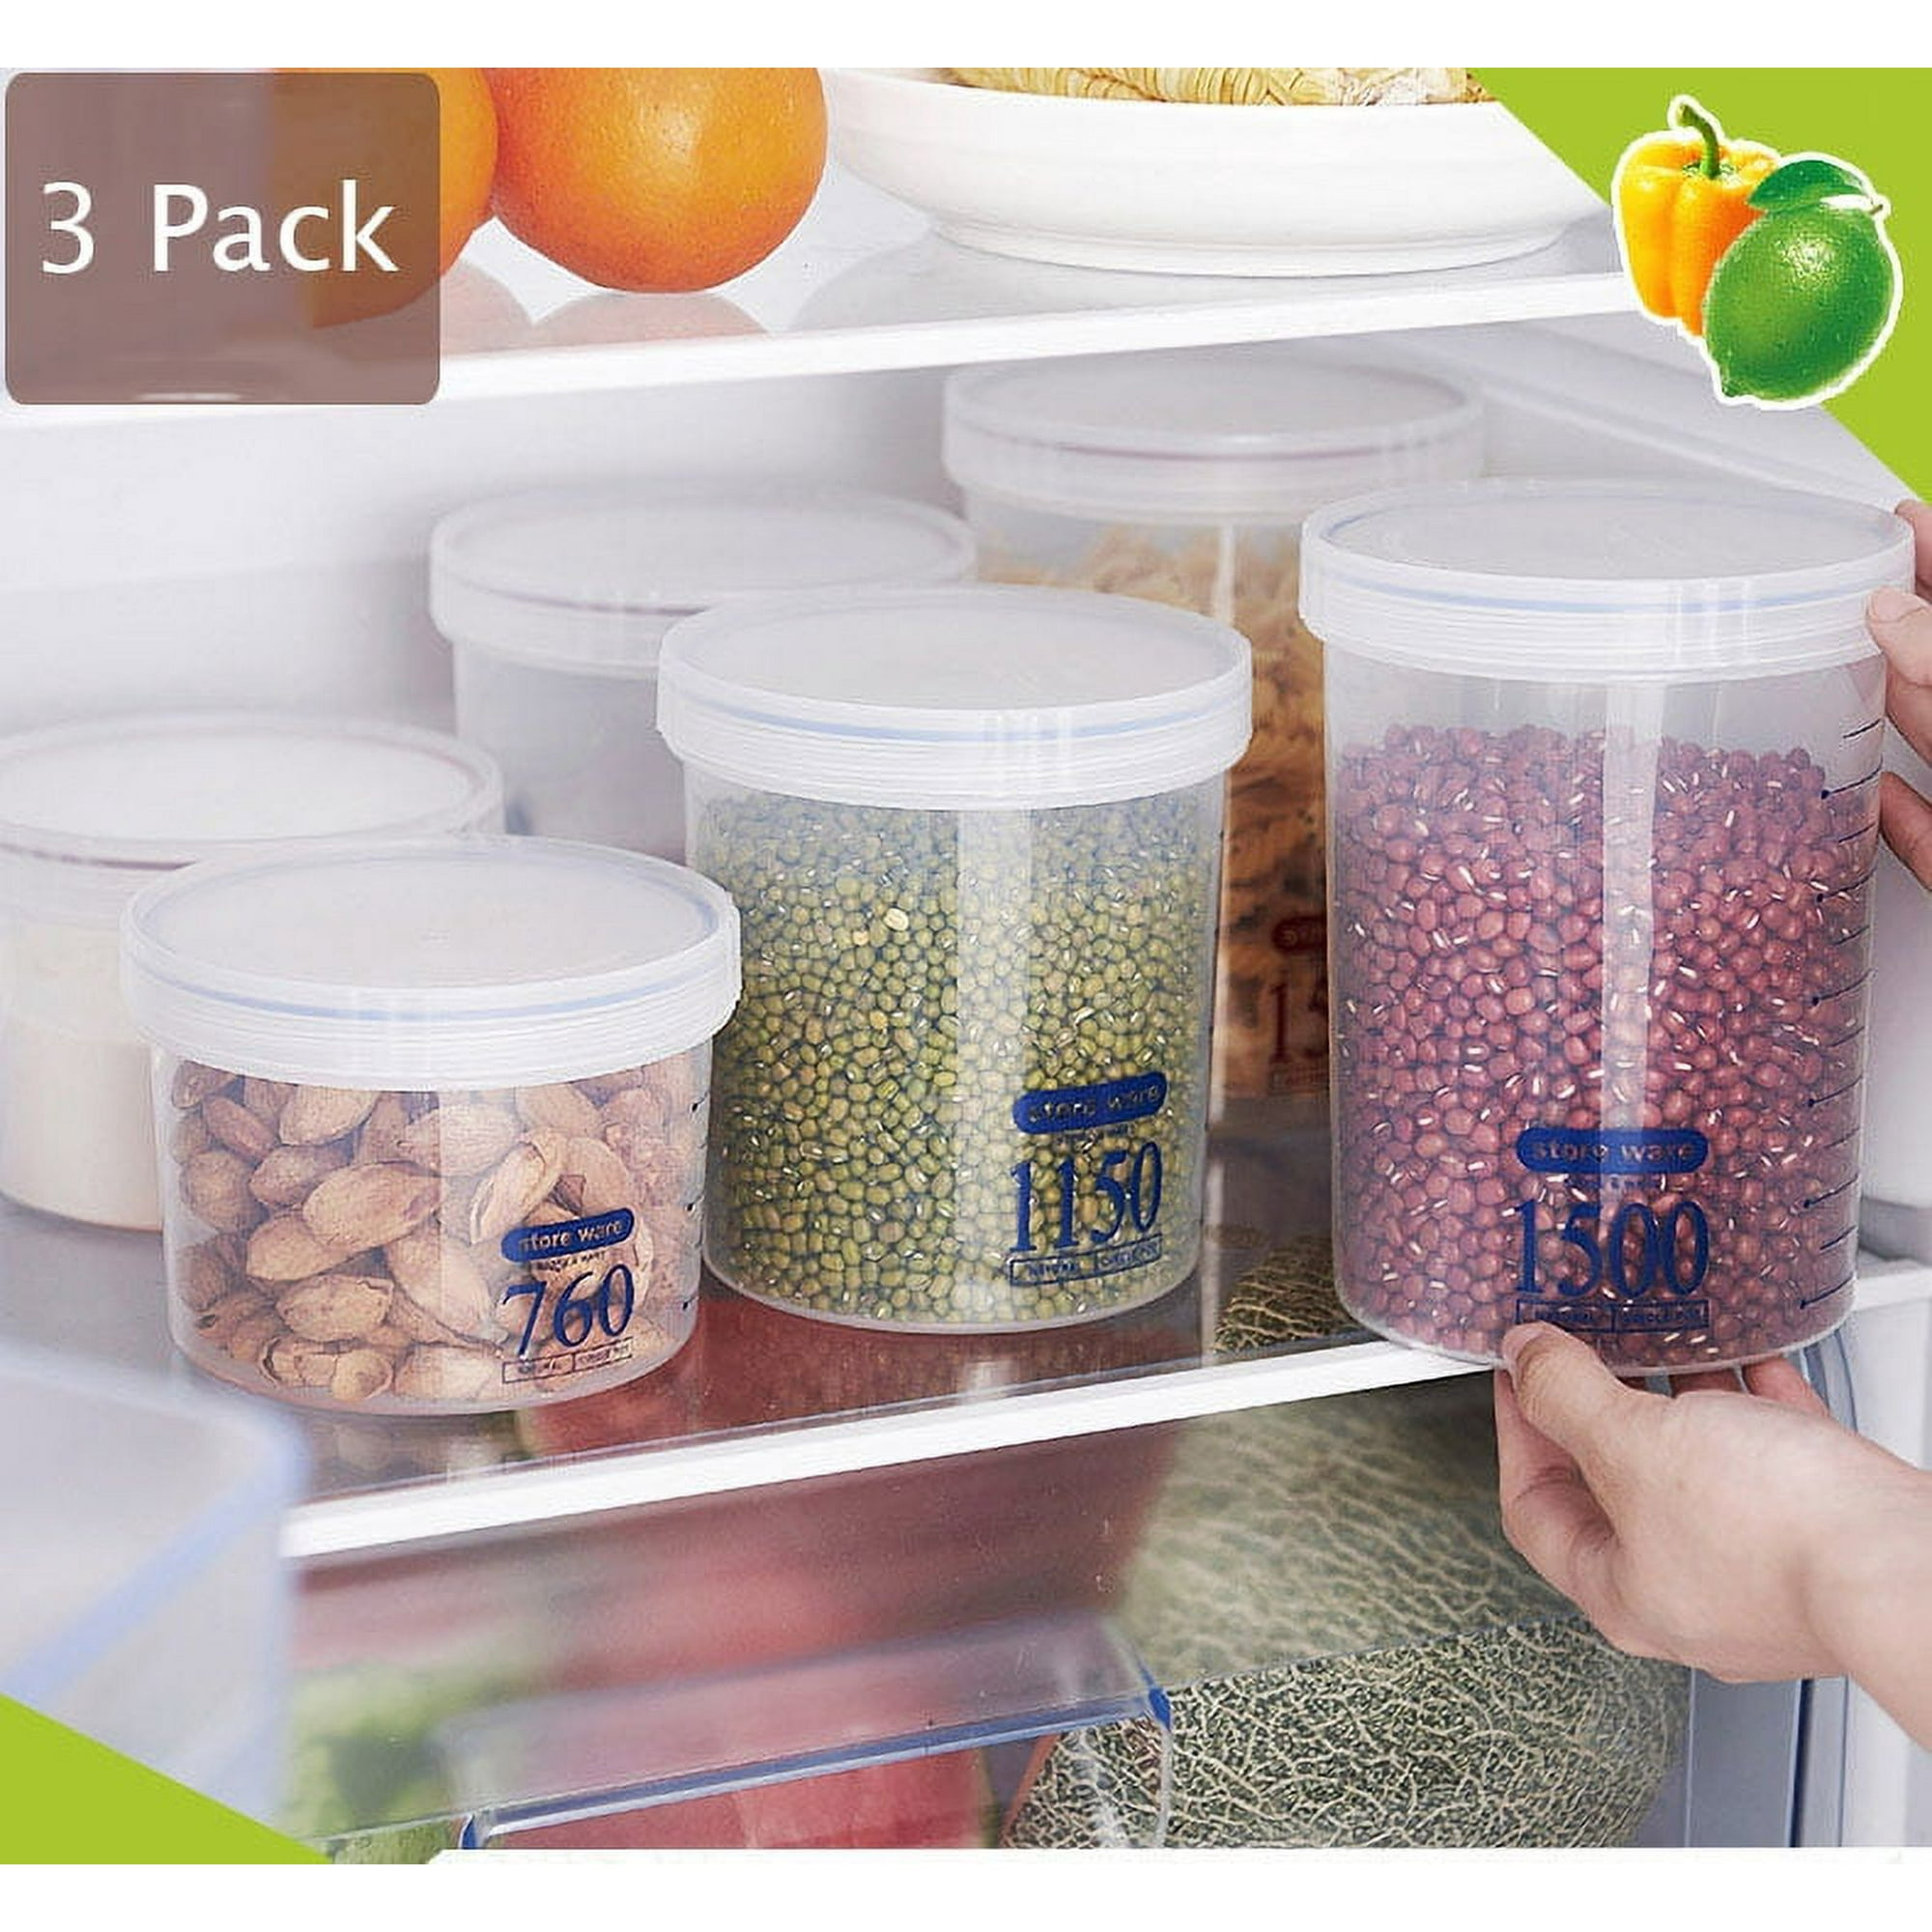 Plastic Food Storage Containers with Lids, 3 Pack Airtight Leak Proof Meal Prep Boxs Freezer Microwave Dishwasher Safe Large Food Containers(760ml